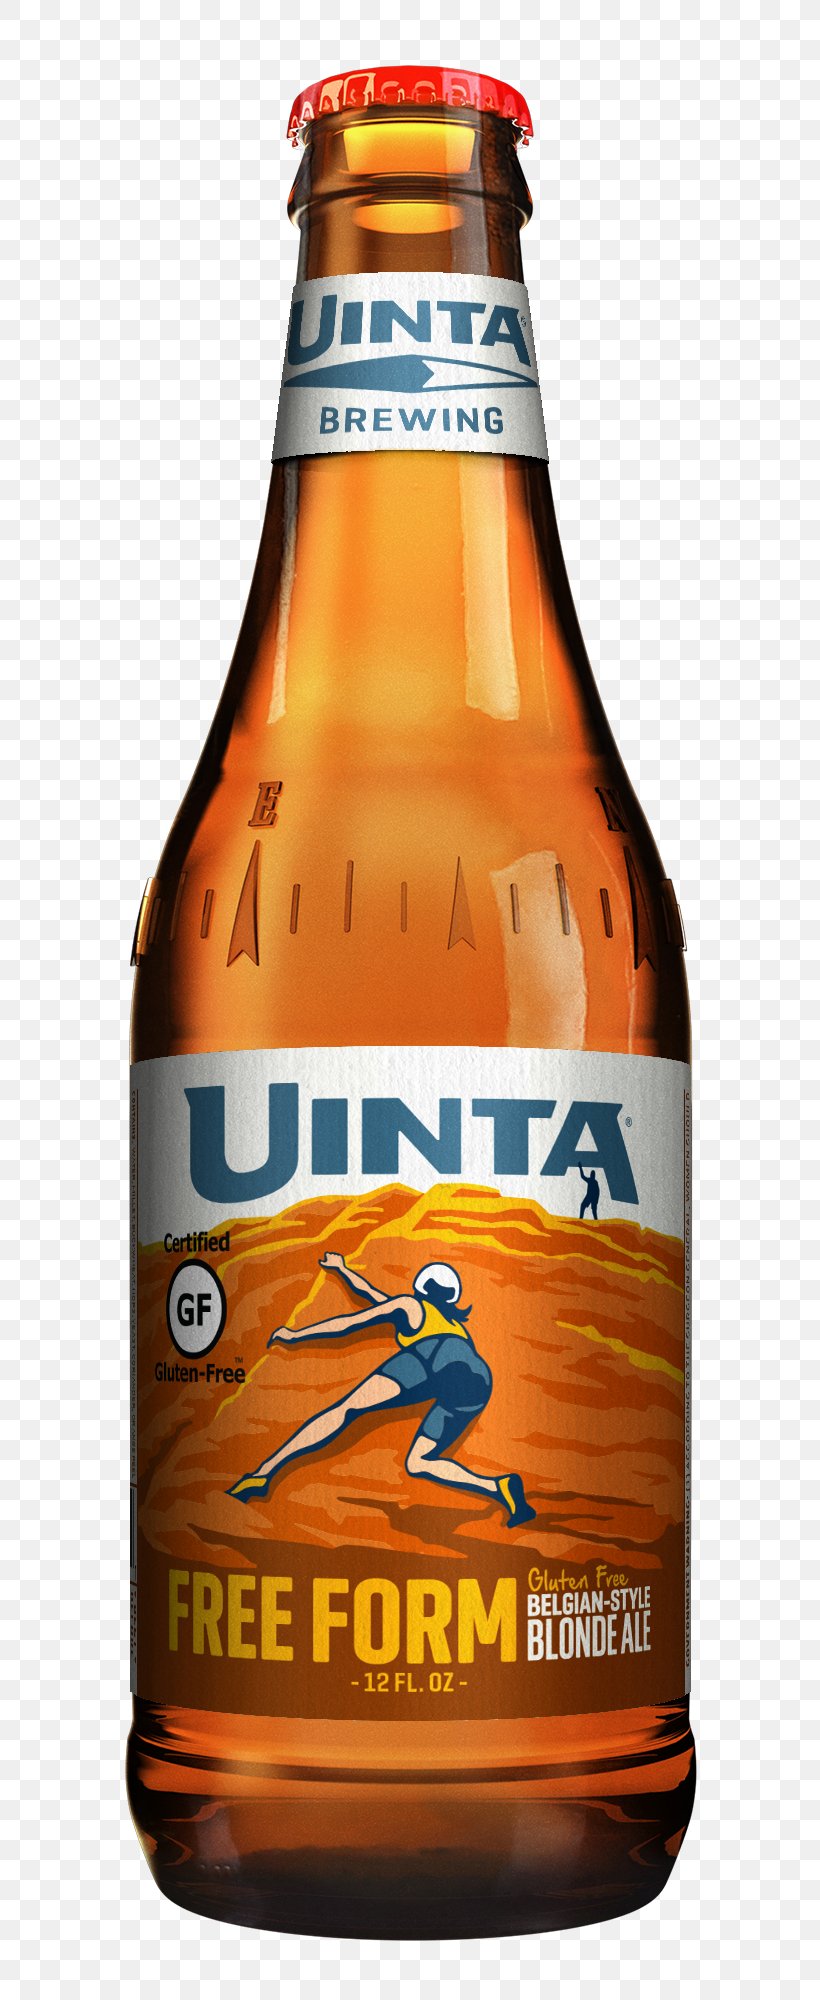 Lager Uinta Brewing Co Beer India Pale Ale Saison, PNG, 700x2000px, Lager, Ale, Beer, Beer Bottle, Beer Brewing Grains Malts Download Free